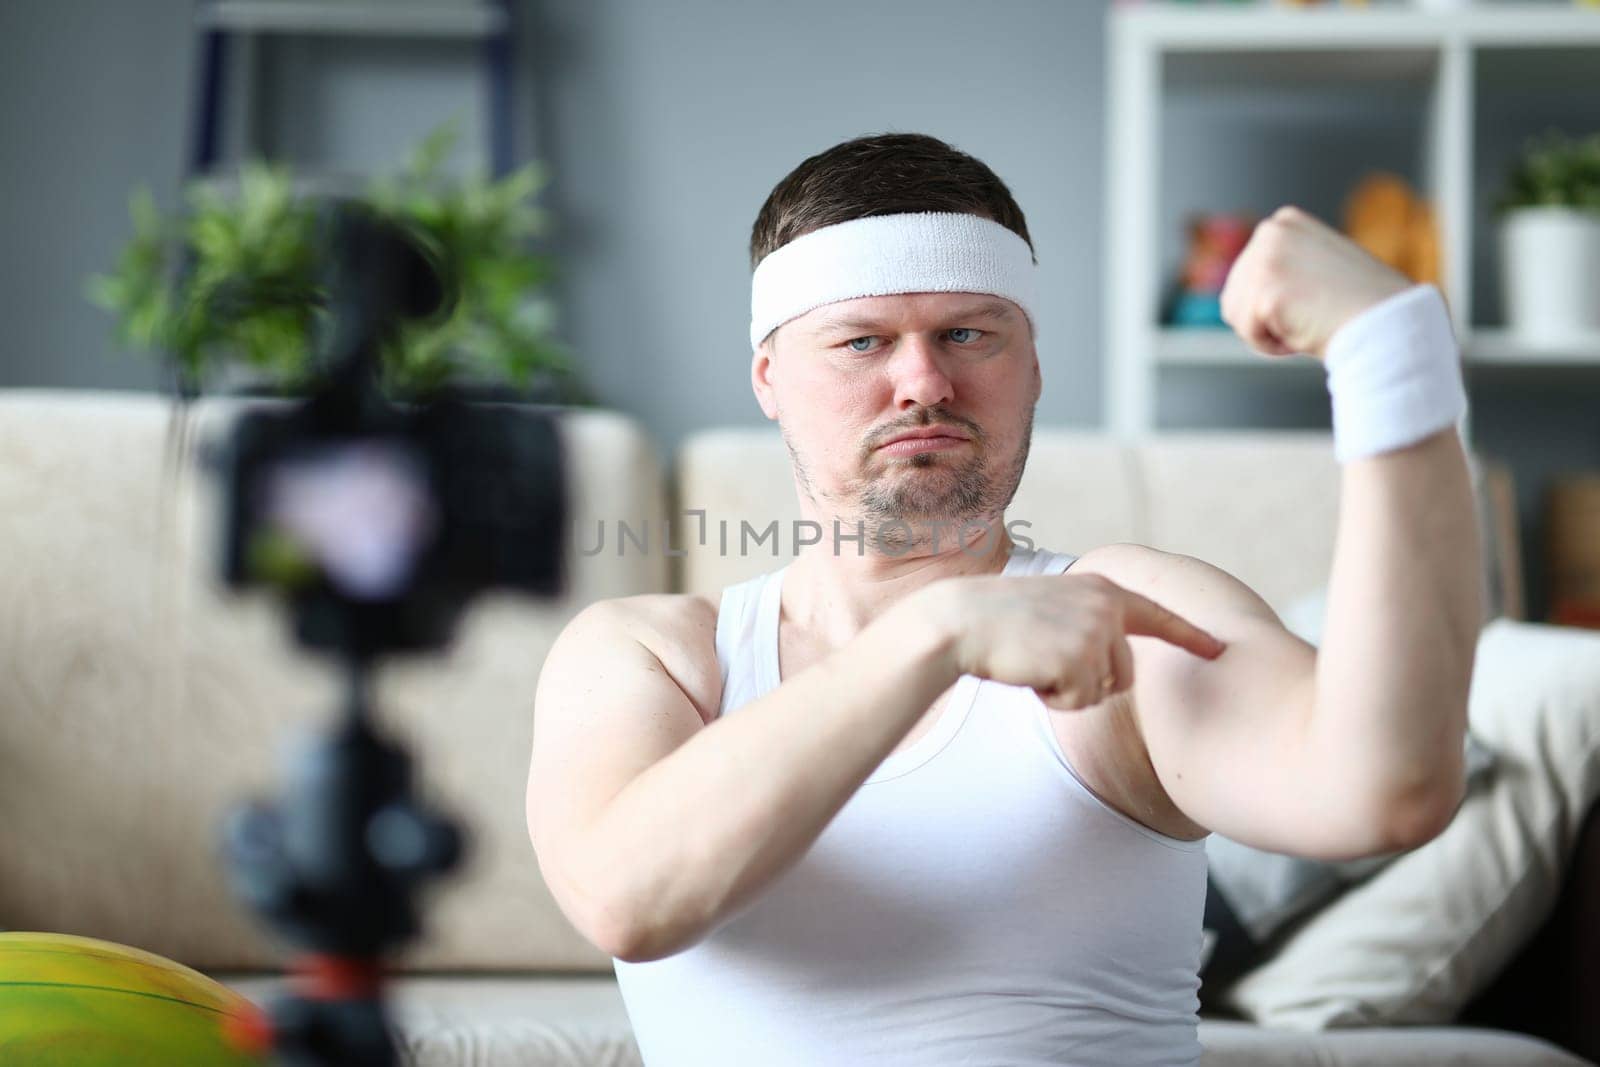 Energetic joyful male blogger measuring bicep size while smiling and updating blog. Big biceps and home fitness concept